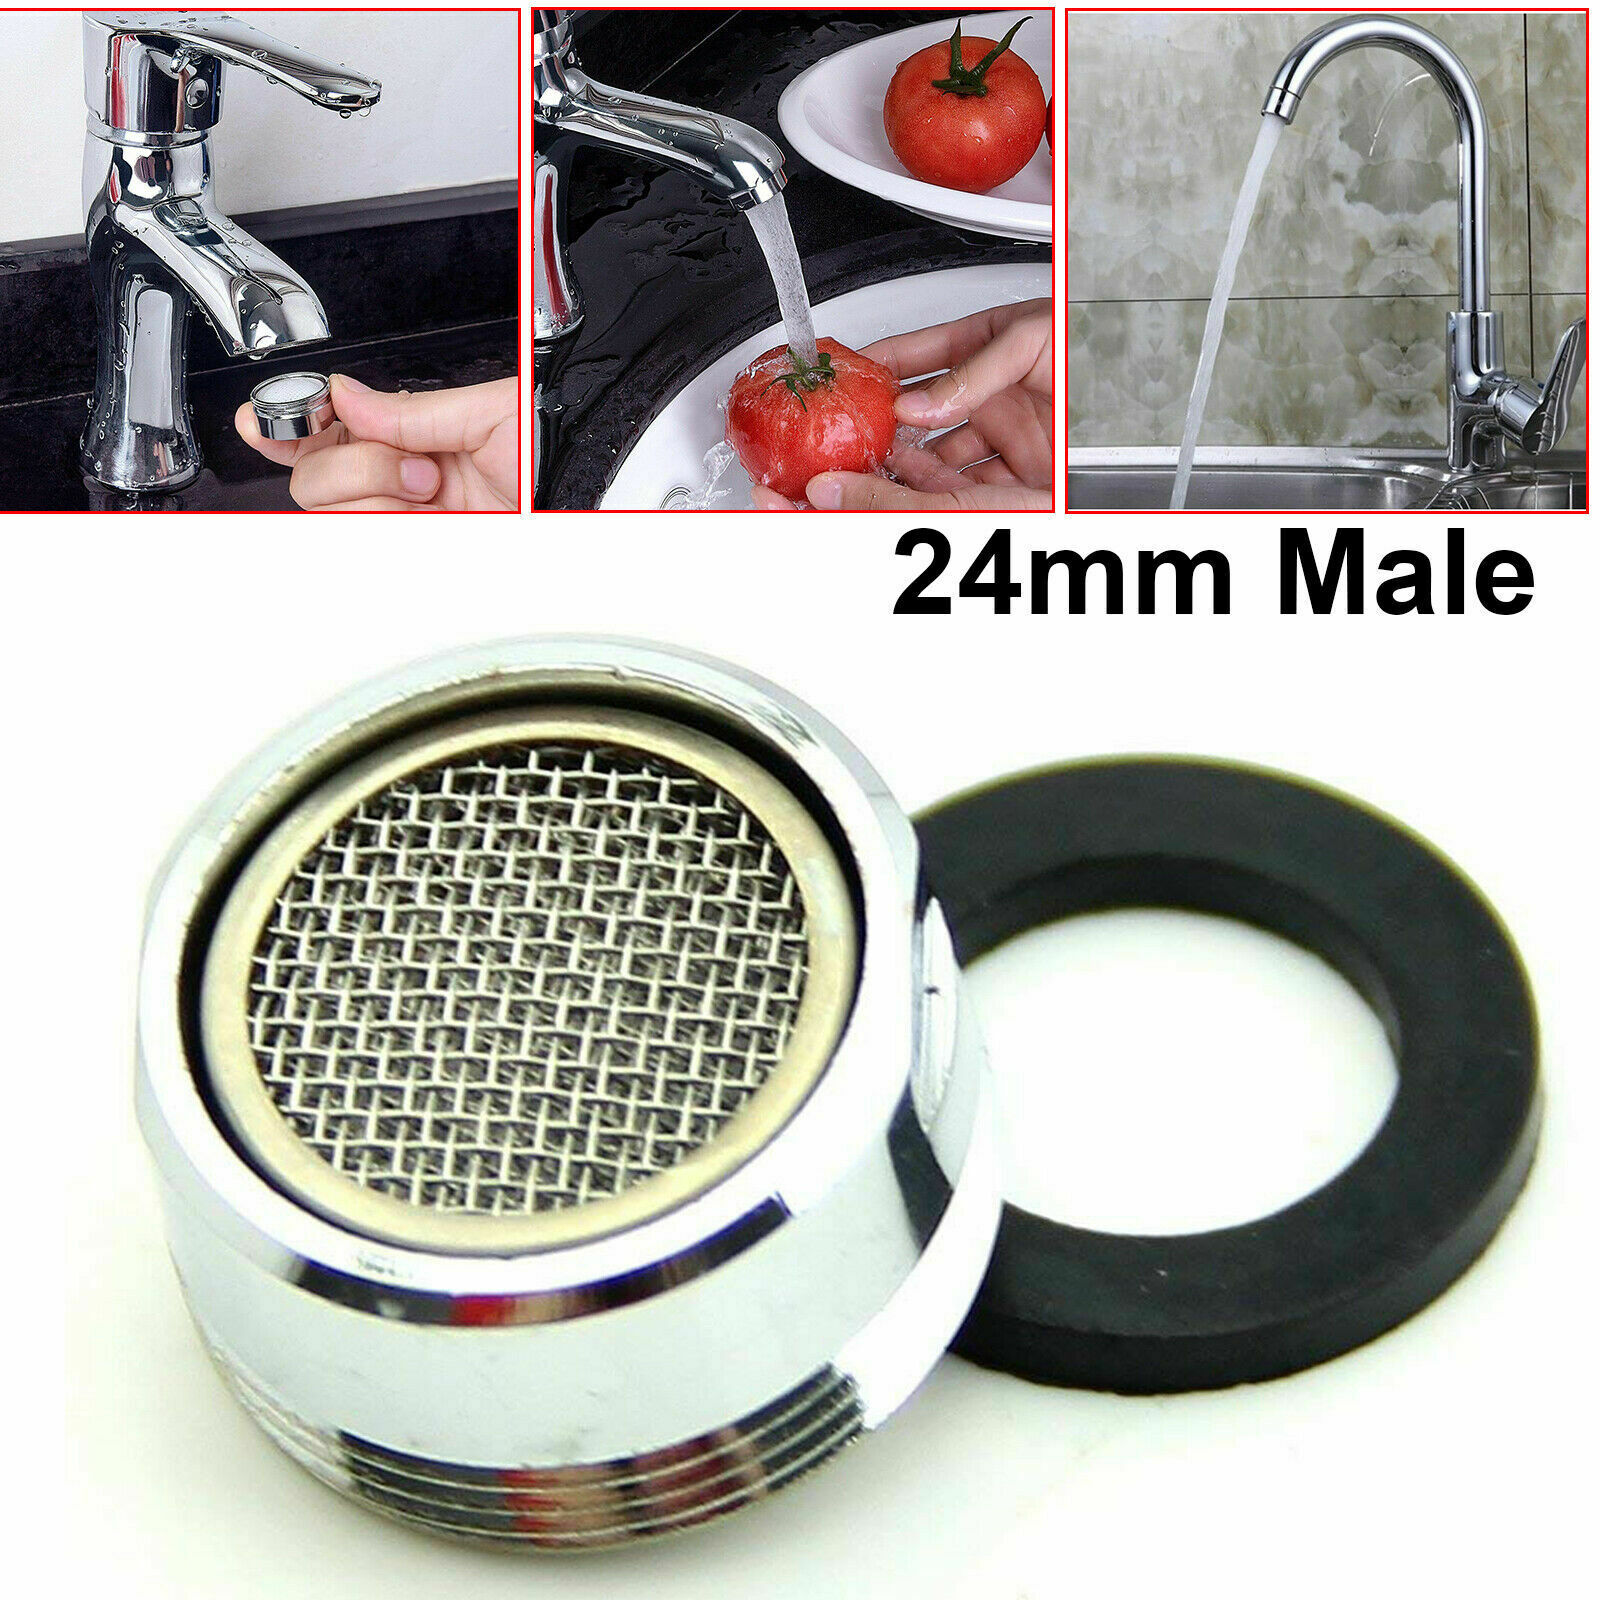 24Mm Male Tap Aerator Water Saving Faucet Nozzle Spout End Diffuser Filter